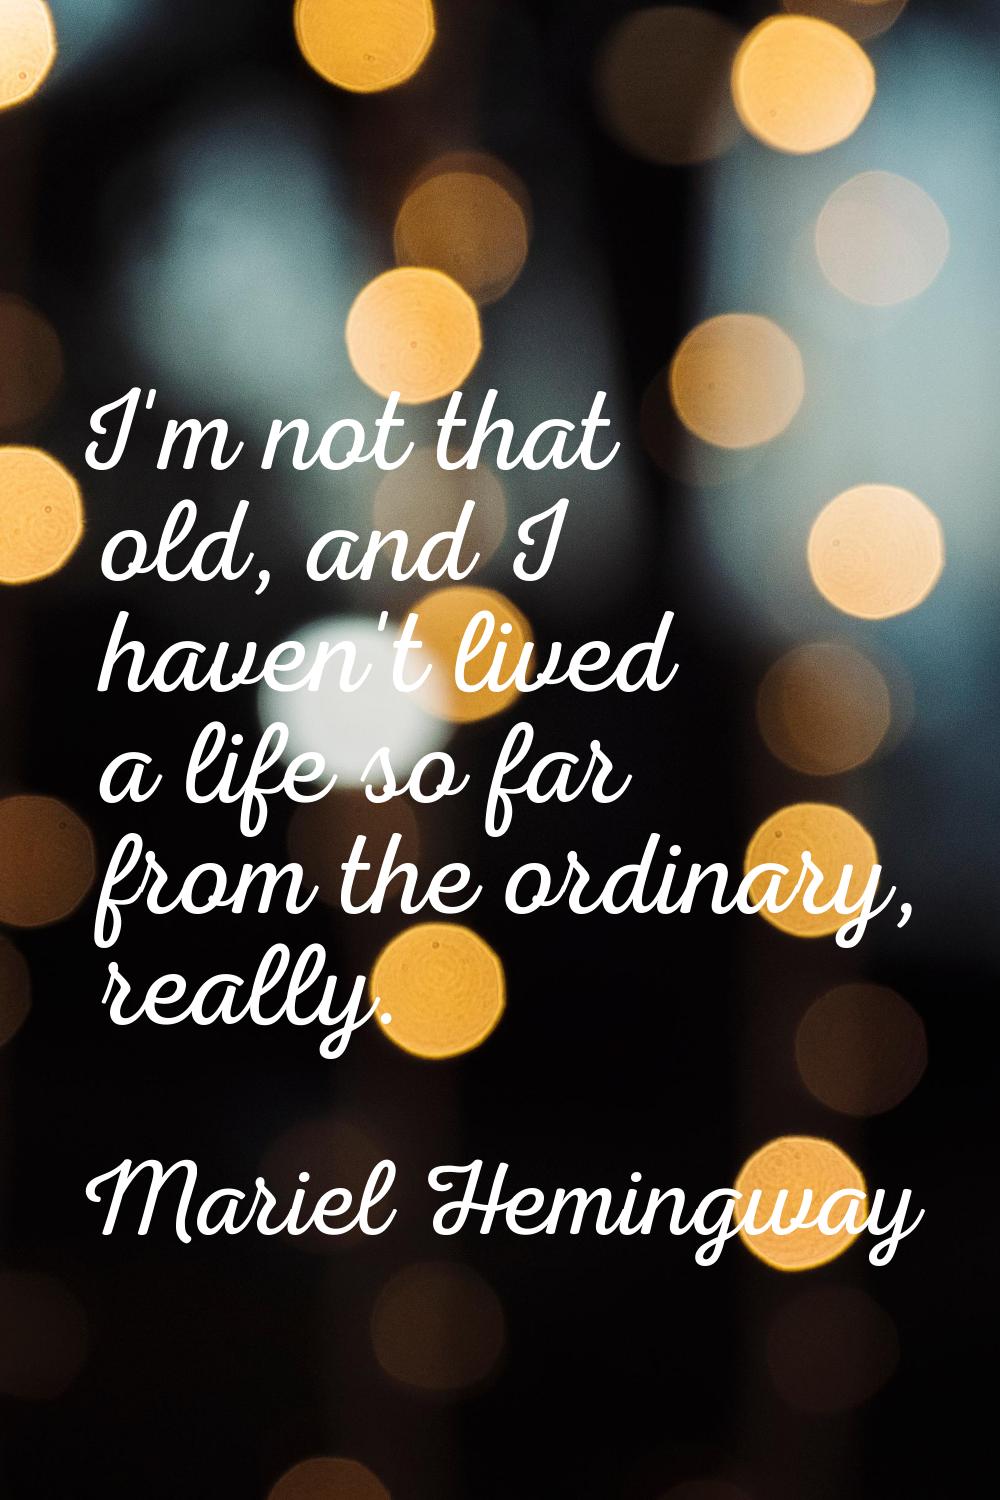 I'm not that old, and I haven't lived a life so far from the ordinary, really.